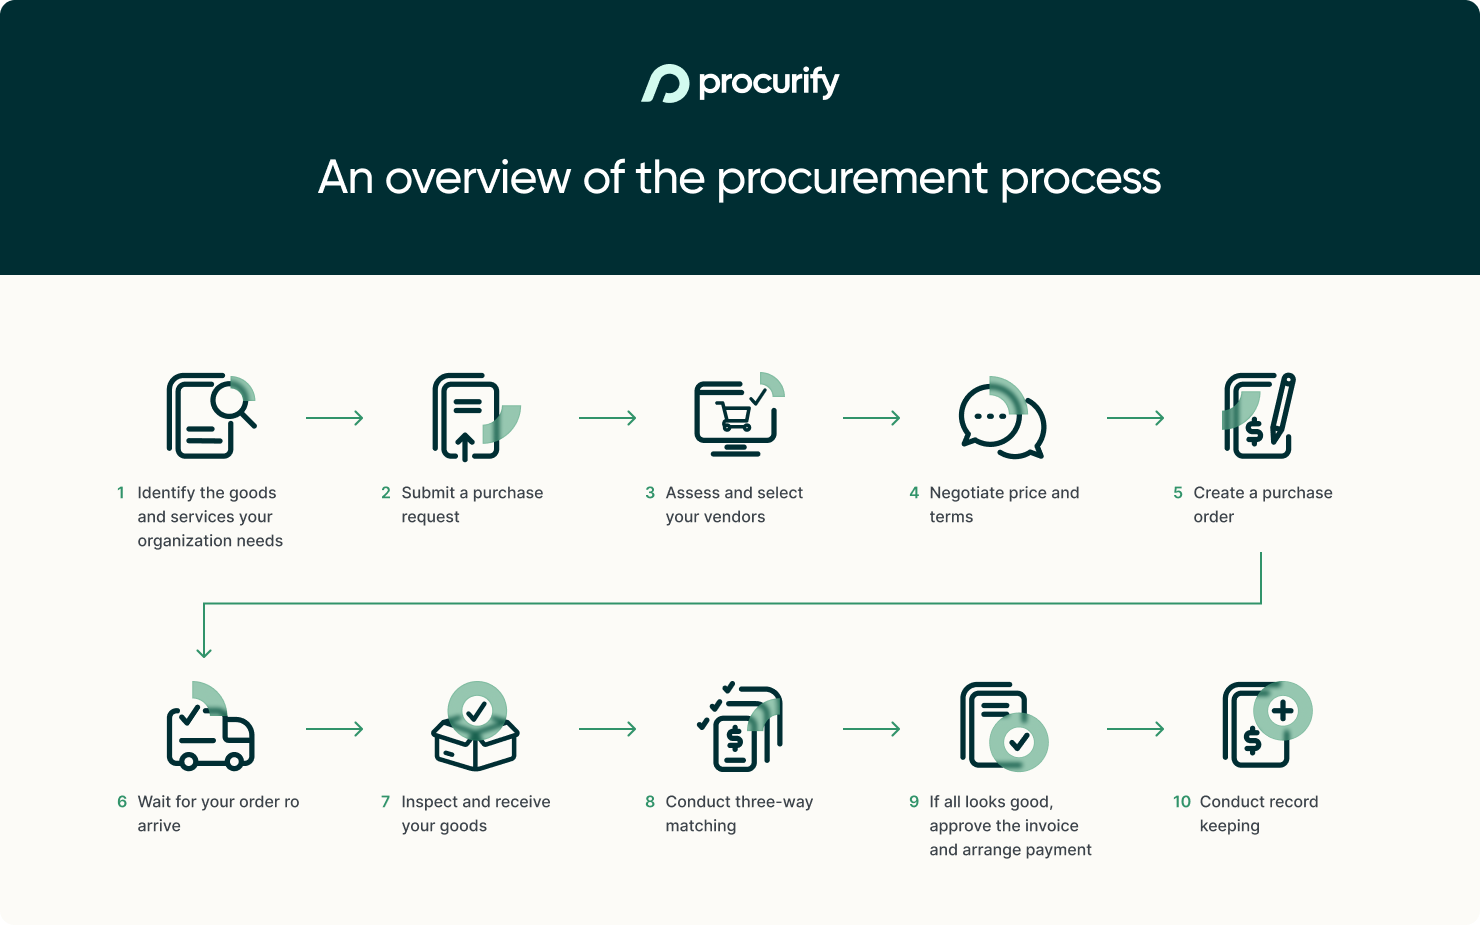 Procurement vs Purchasing: What's the Difference?